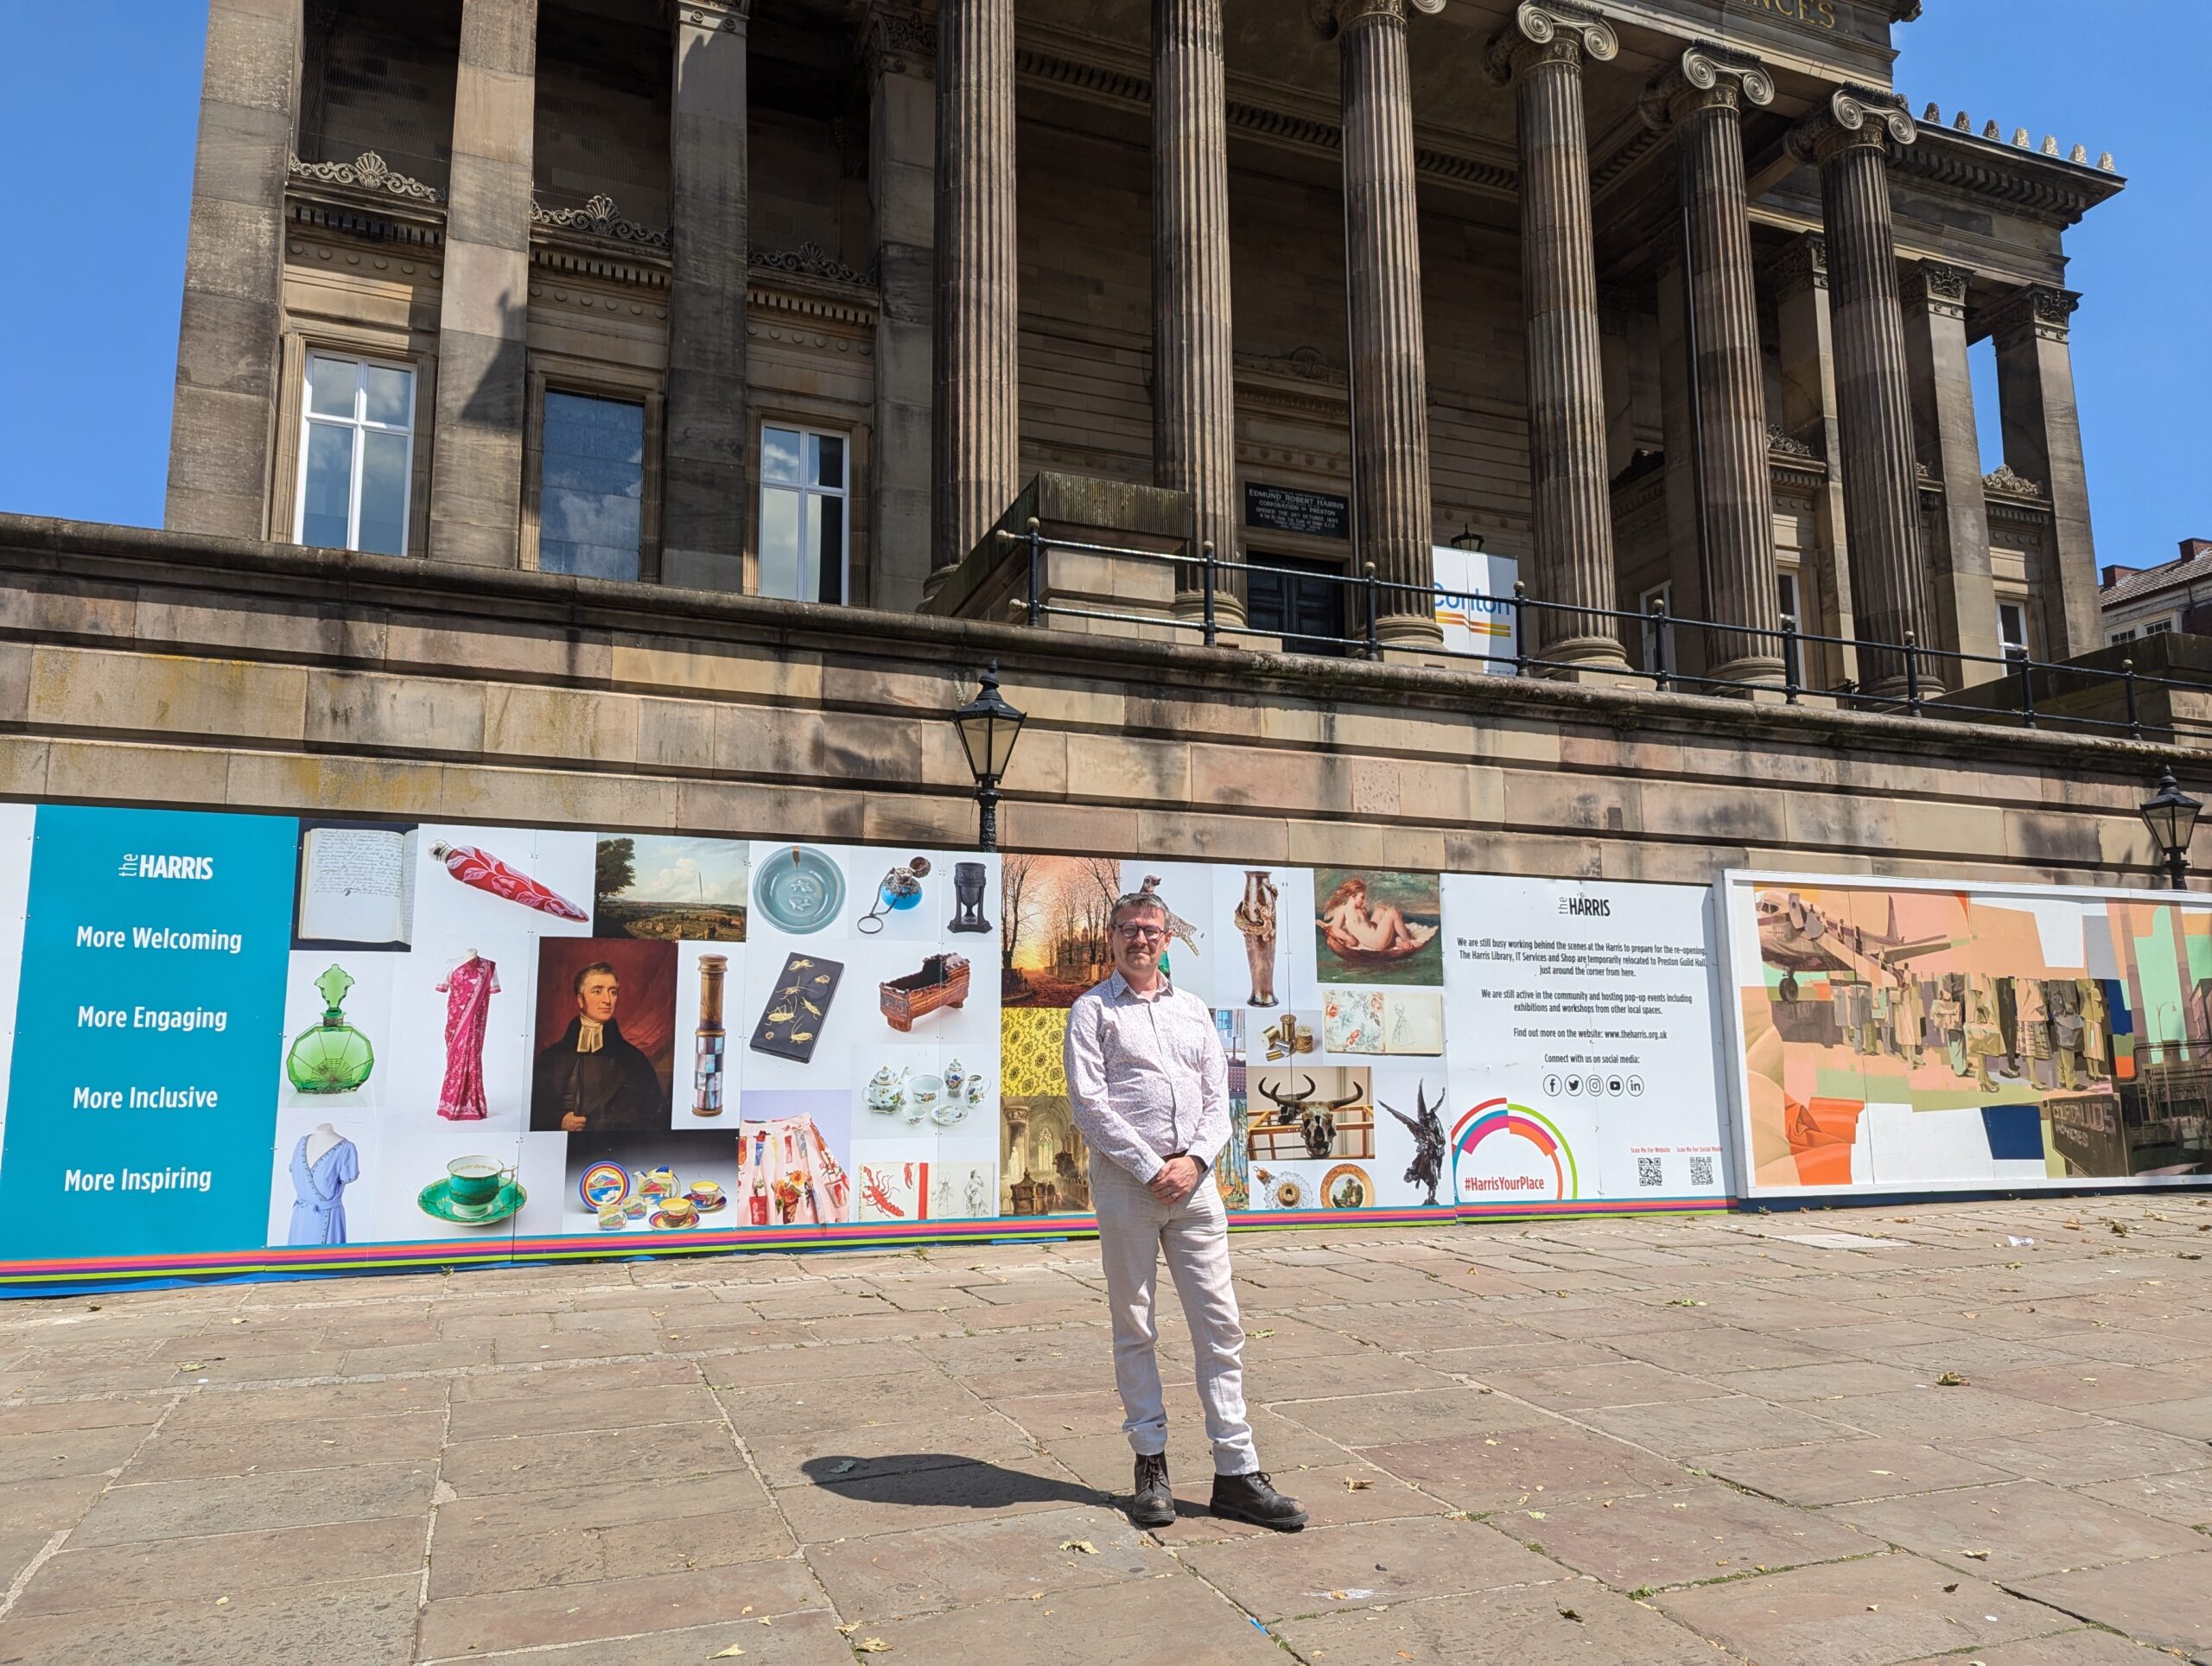 A person wearing a white shirt and beige trousers stands in front of The Harris on a sunny day.